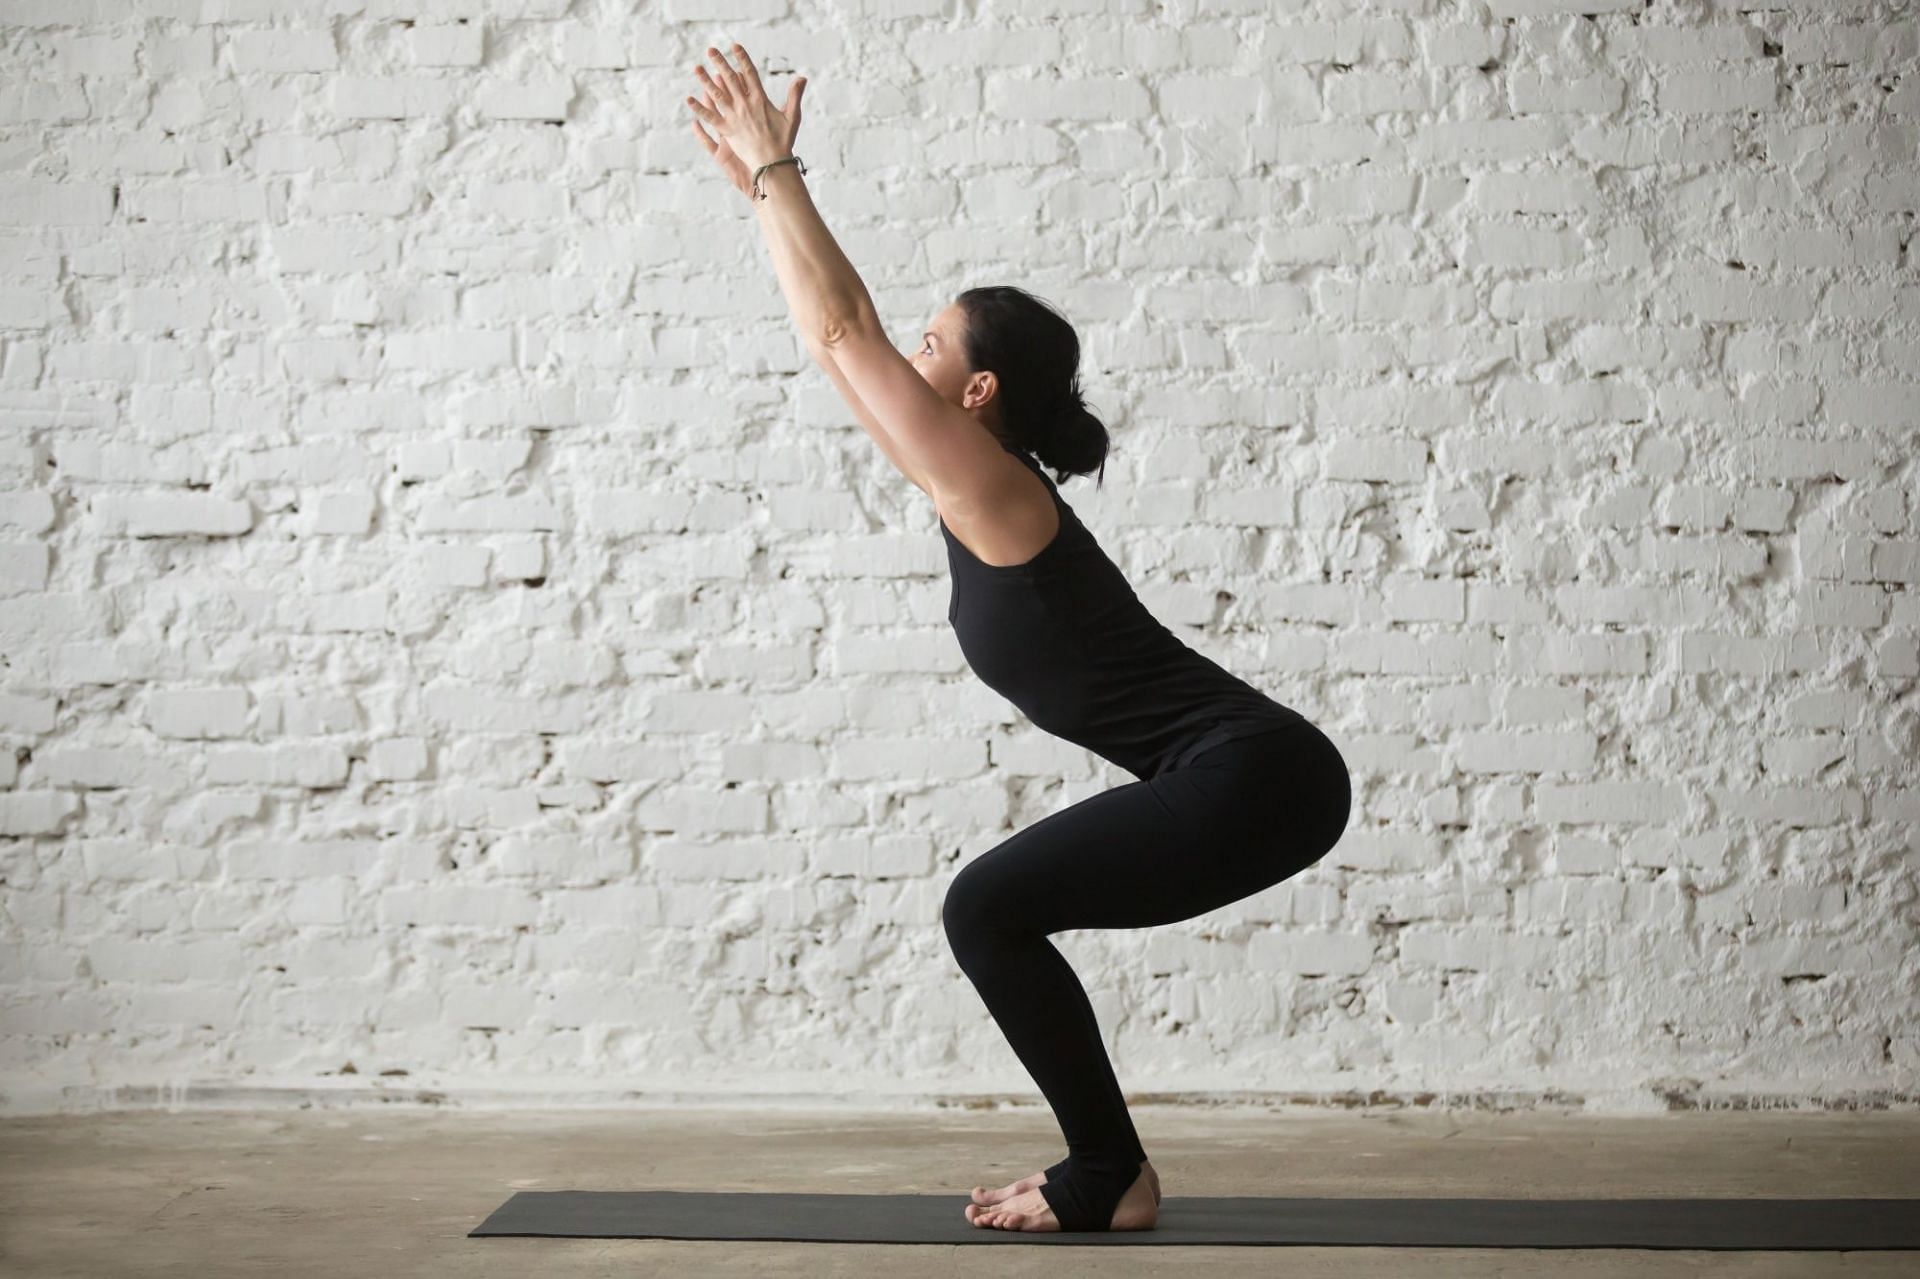 3-people yoga poses for beginners: 5 simple ones to start your